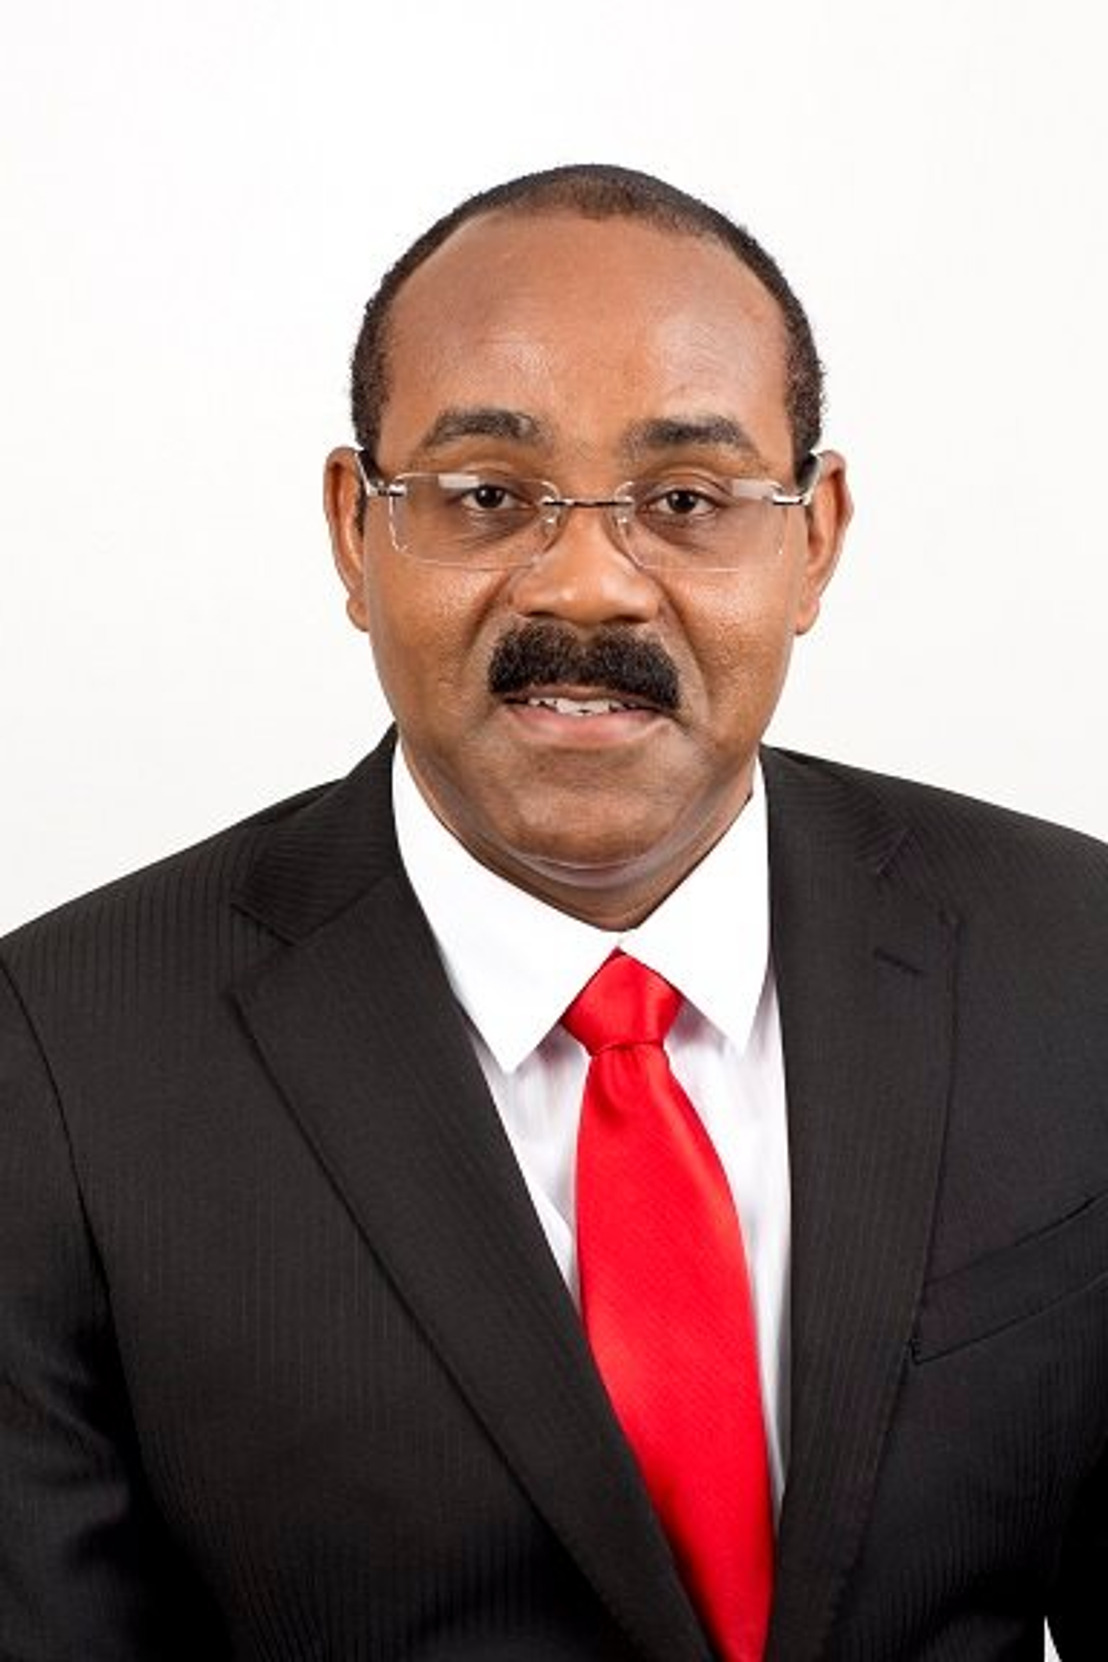 OECS Commission congratulates Prime Minister Gaston Browne and the ABLP on its new Mandate